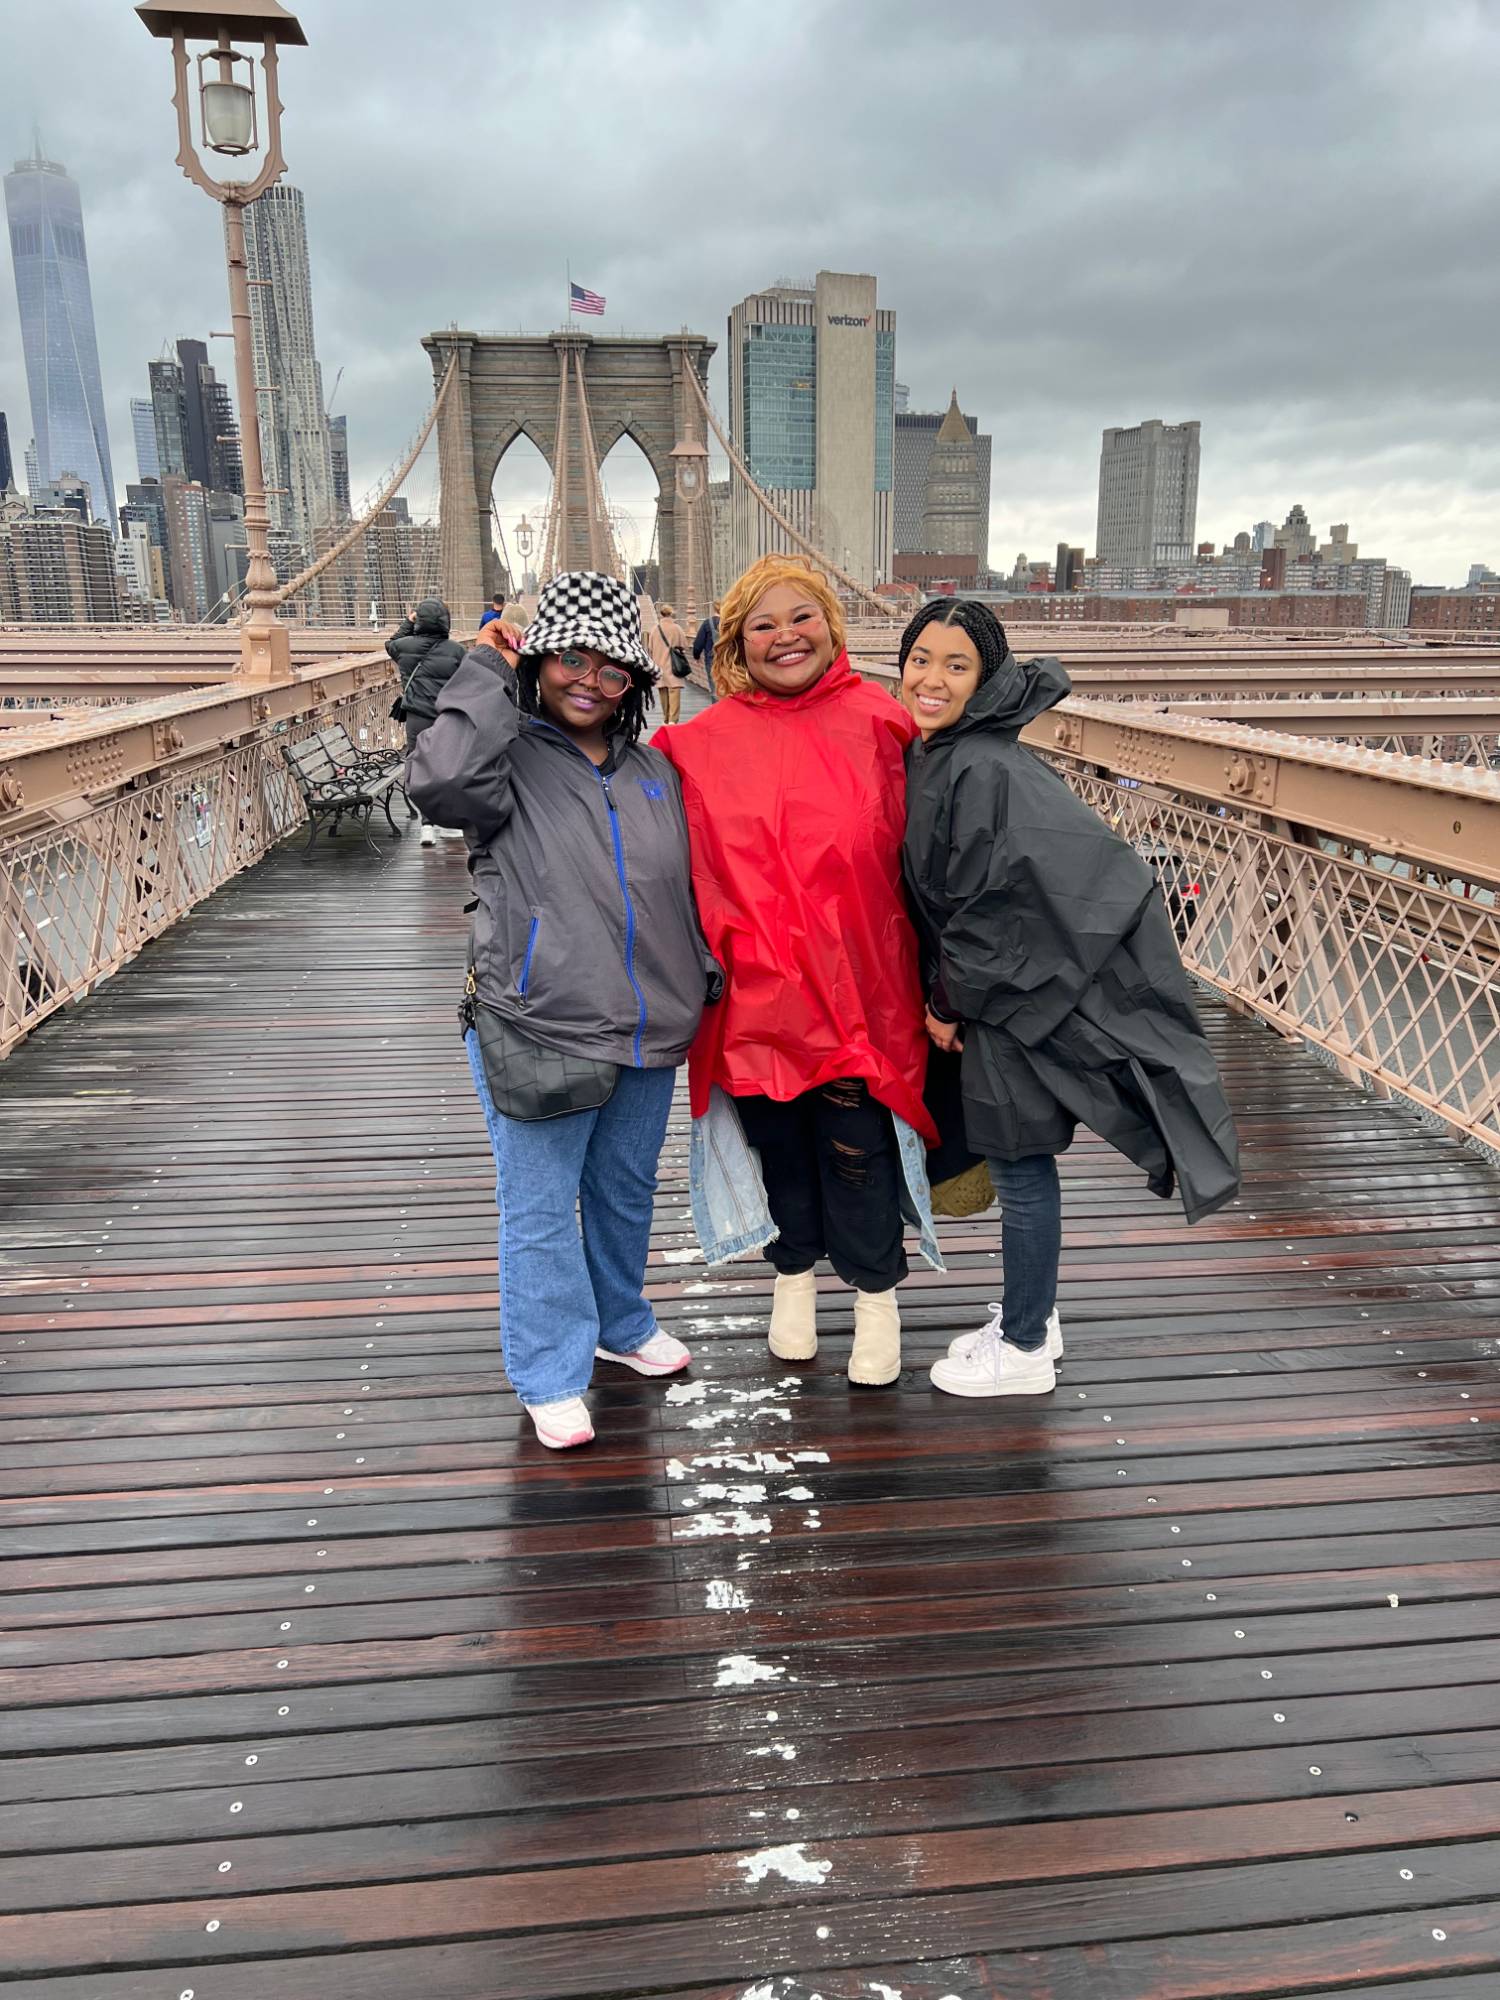 Learning about the history of the Brooklyn Bridge on a rainy Saturday afternoon